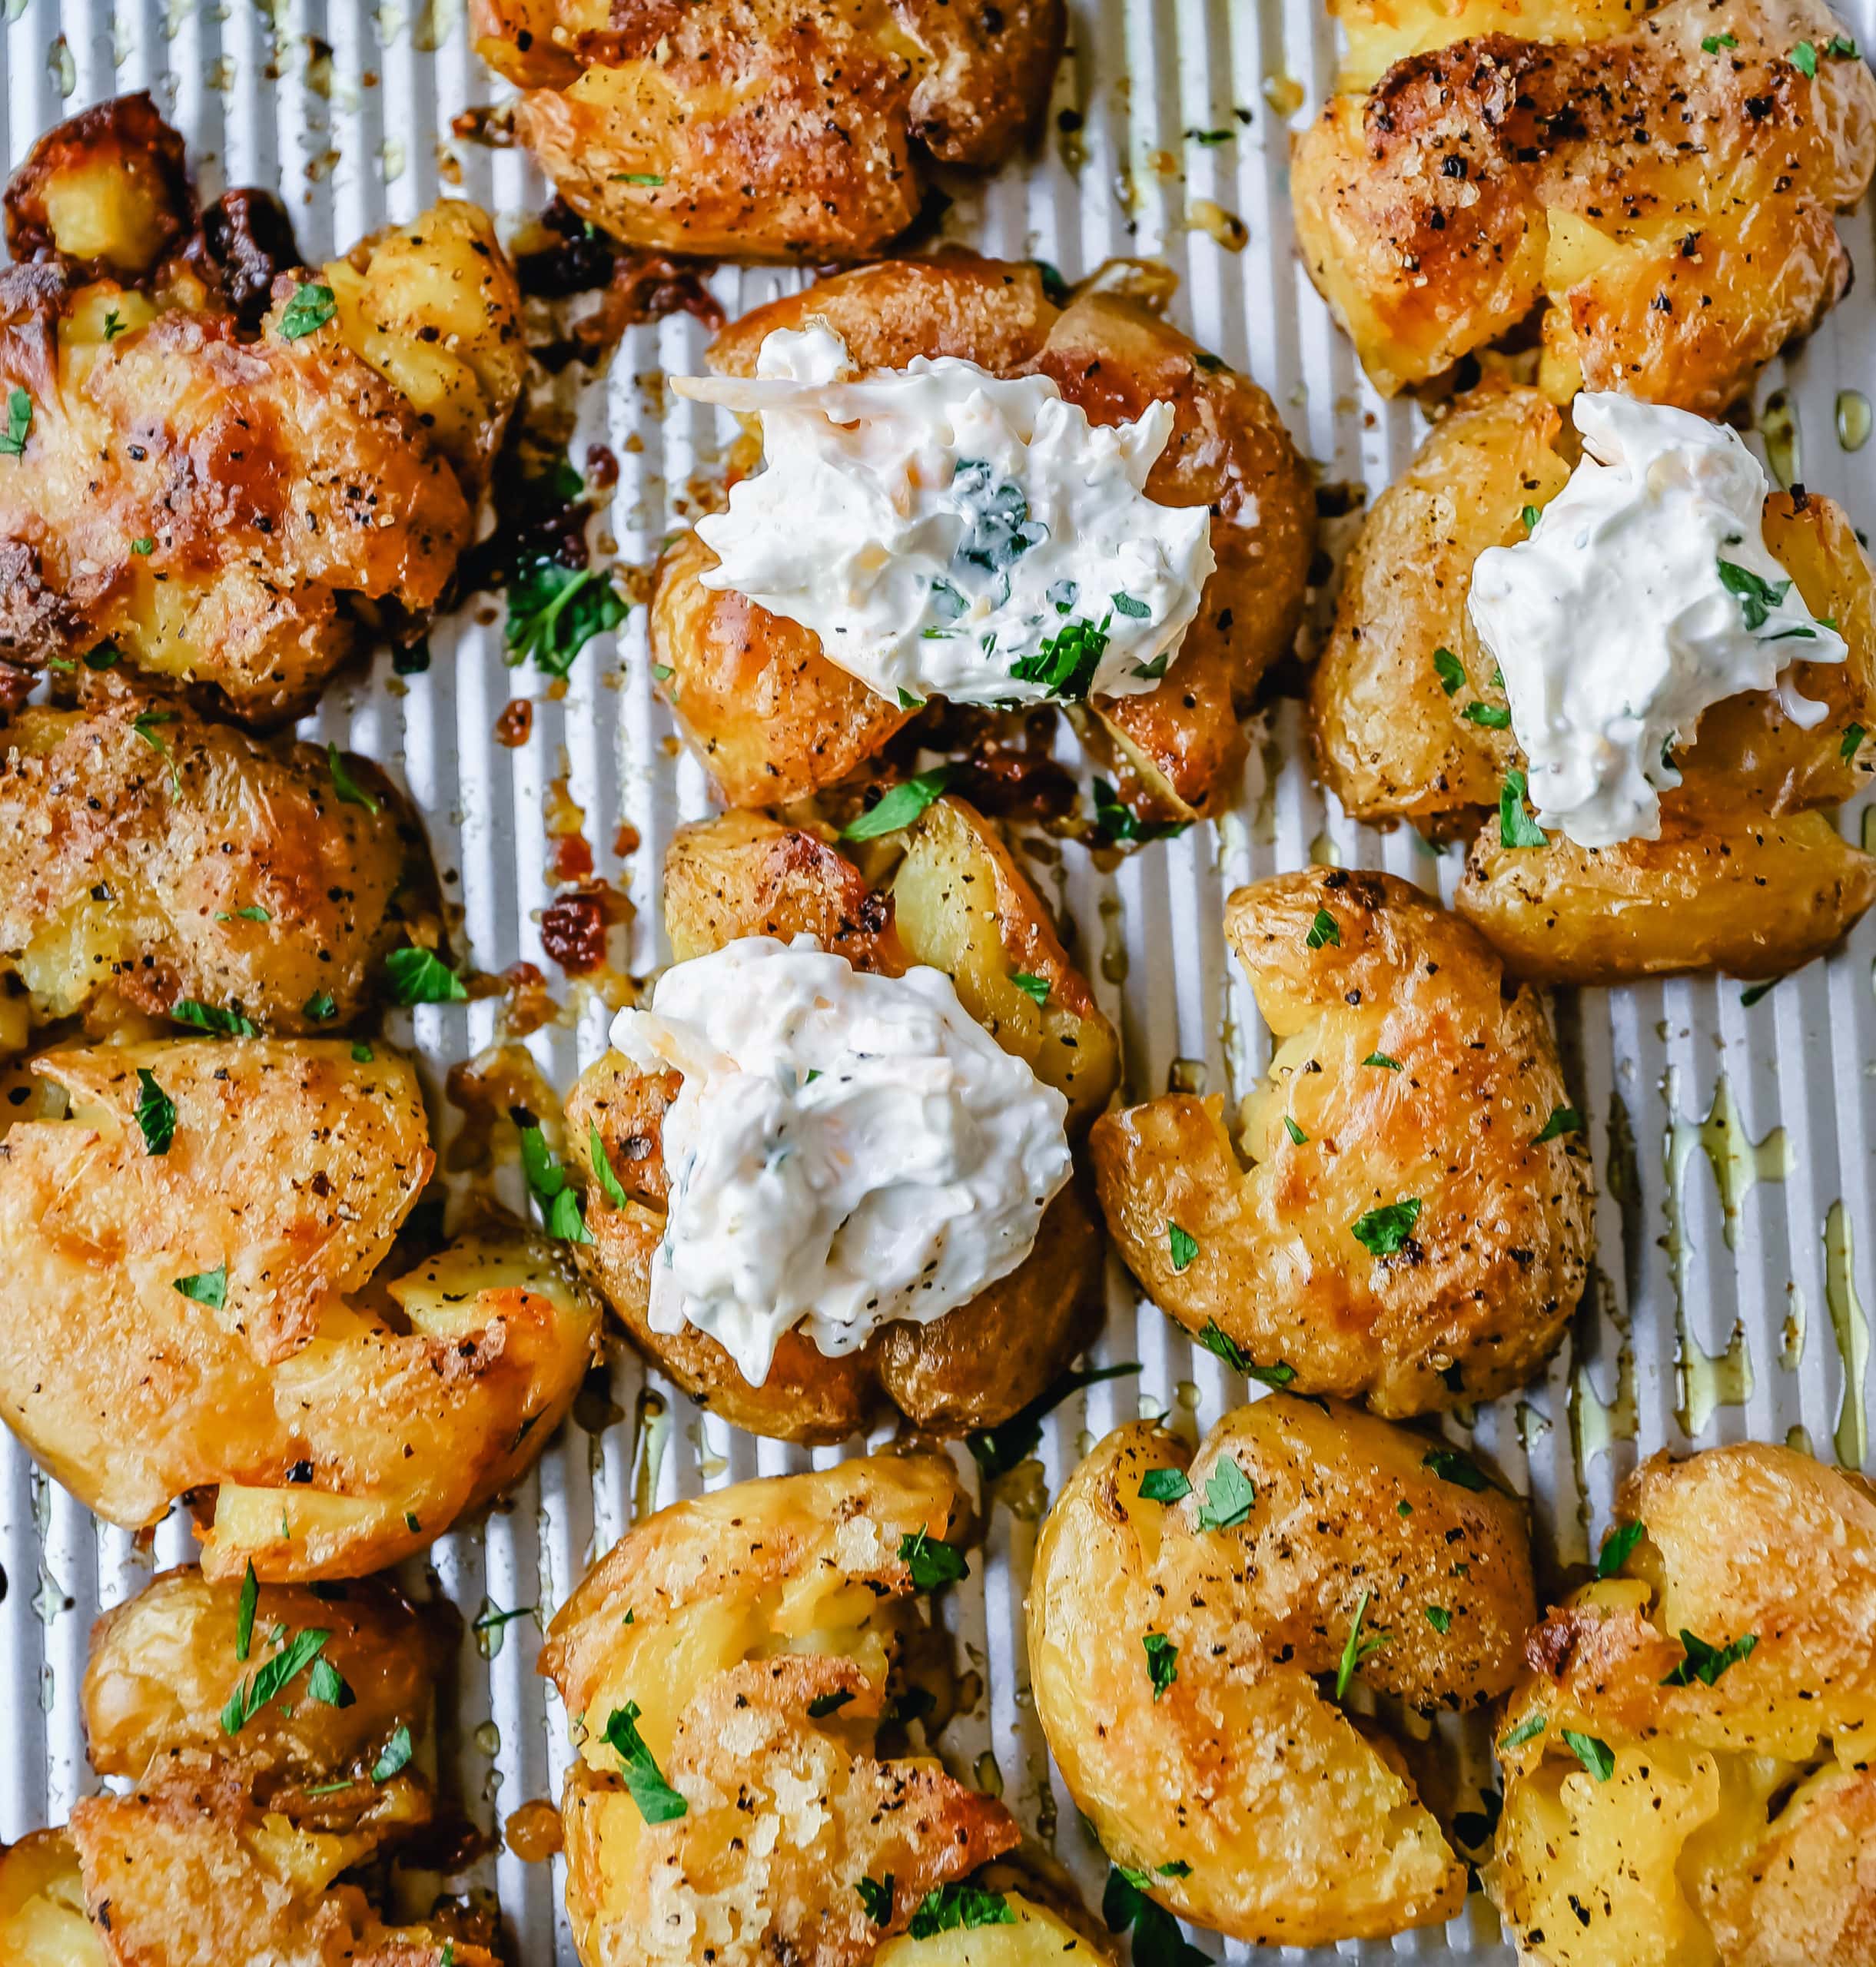 Crispy Smashed Potatoes. Crispy smashed potatoes with creamy, fluffy centers and crispy outsides. Petite potatoes topped with olive oil, salted butter, salt, and pepper and baked until crispy and topped with a garlic cheddar sour cream dip. The best smashed potatoes recipe! 